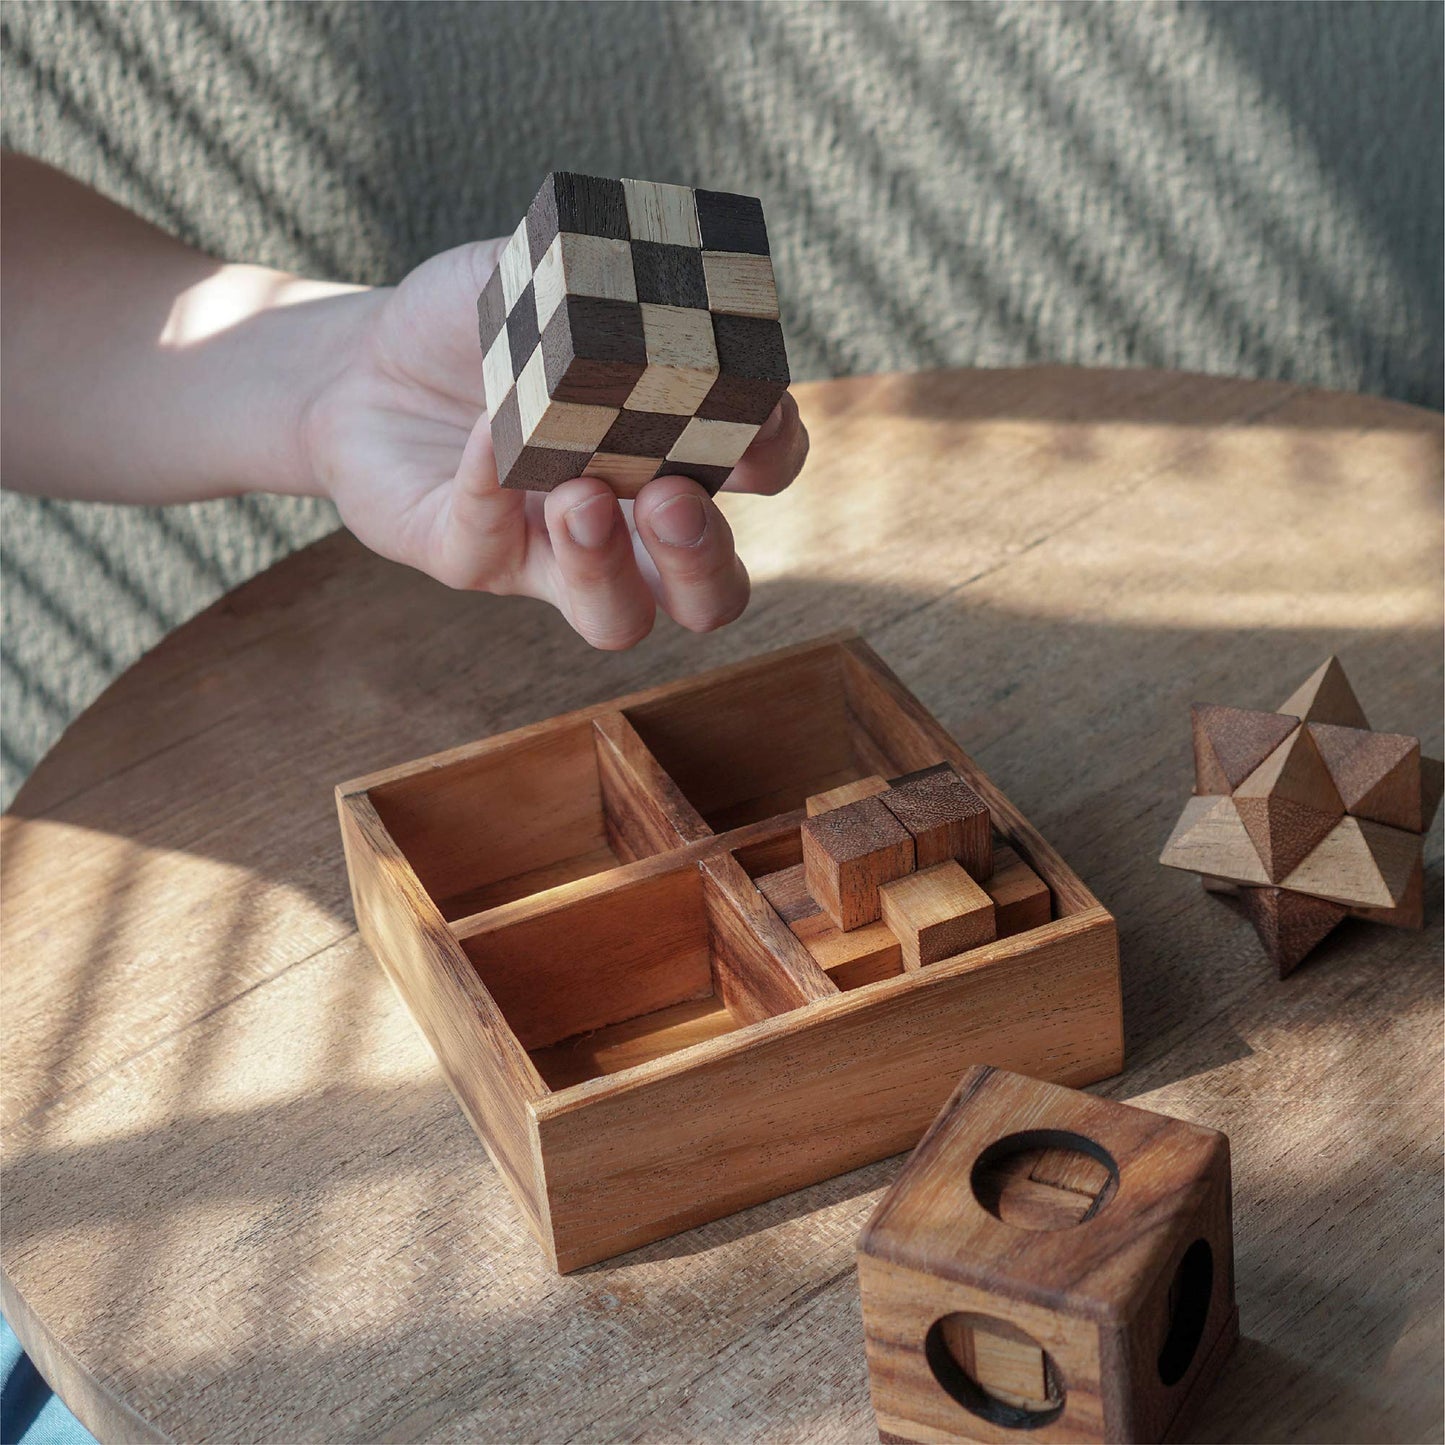 BSIRI Wooden Puzzle Box Set (4 Games) - Challenging Brain Teasers 3D Puzzles for Adults, Interlocking Games for IQ Test. Ideal for Rustic Patio Decor, Unique Gift for Christmas and Birthdays